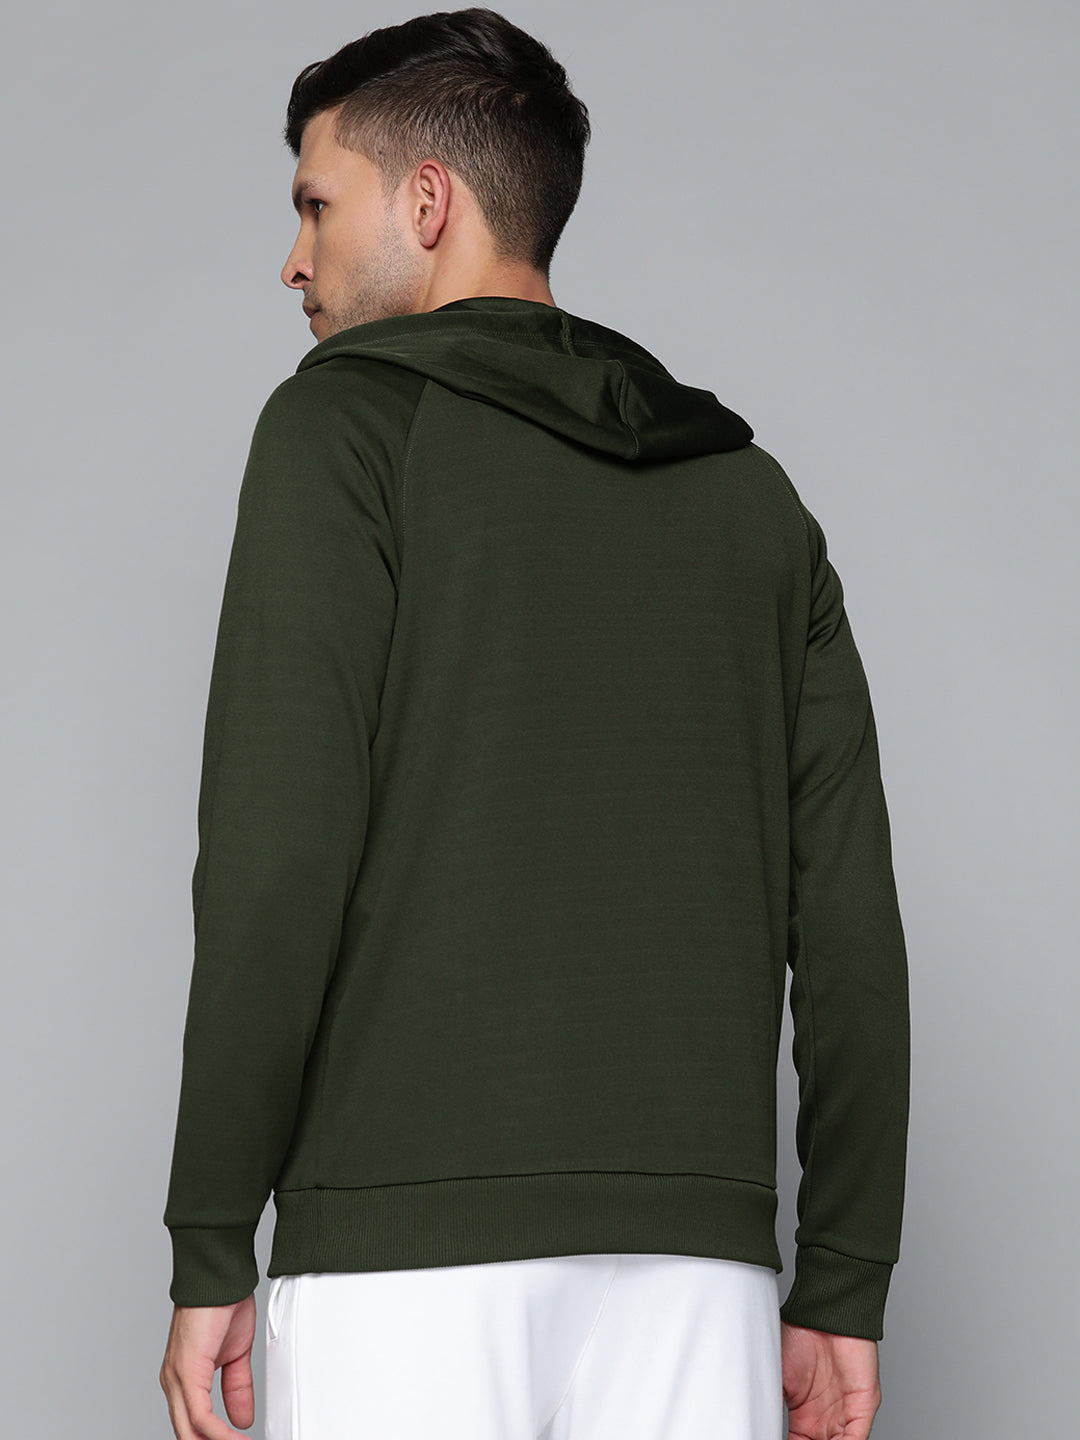 Alcis Men Olive Green Abstract Printed Hooded Sweatshirt